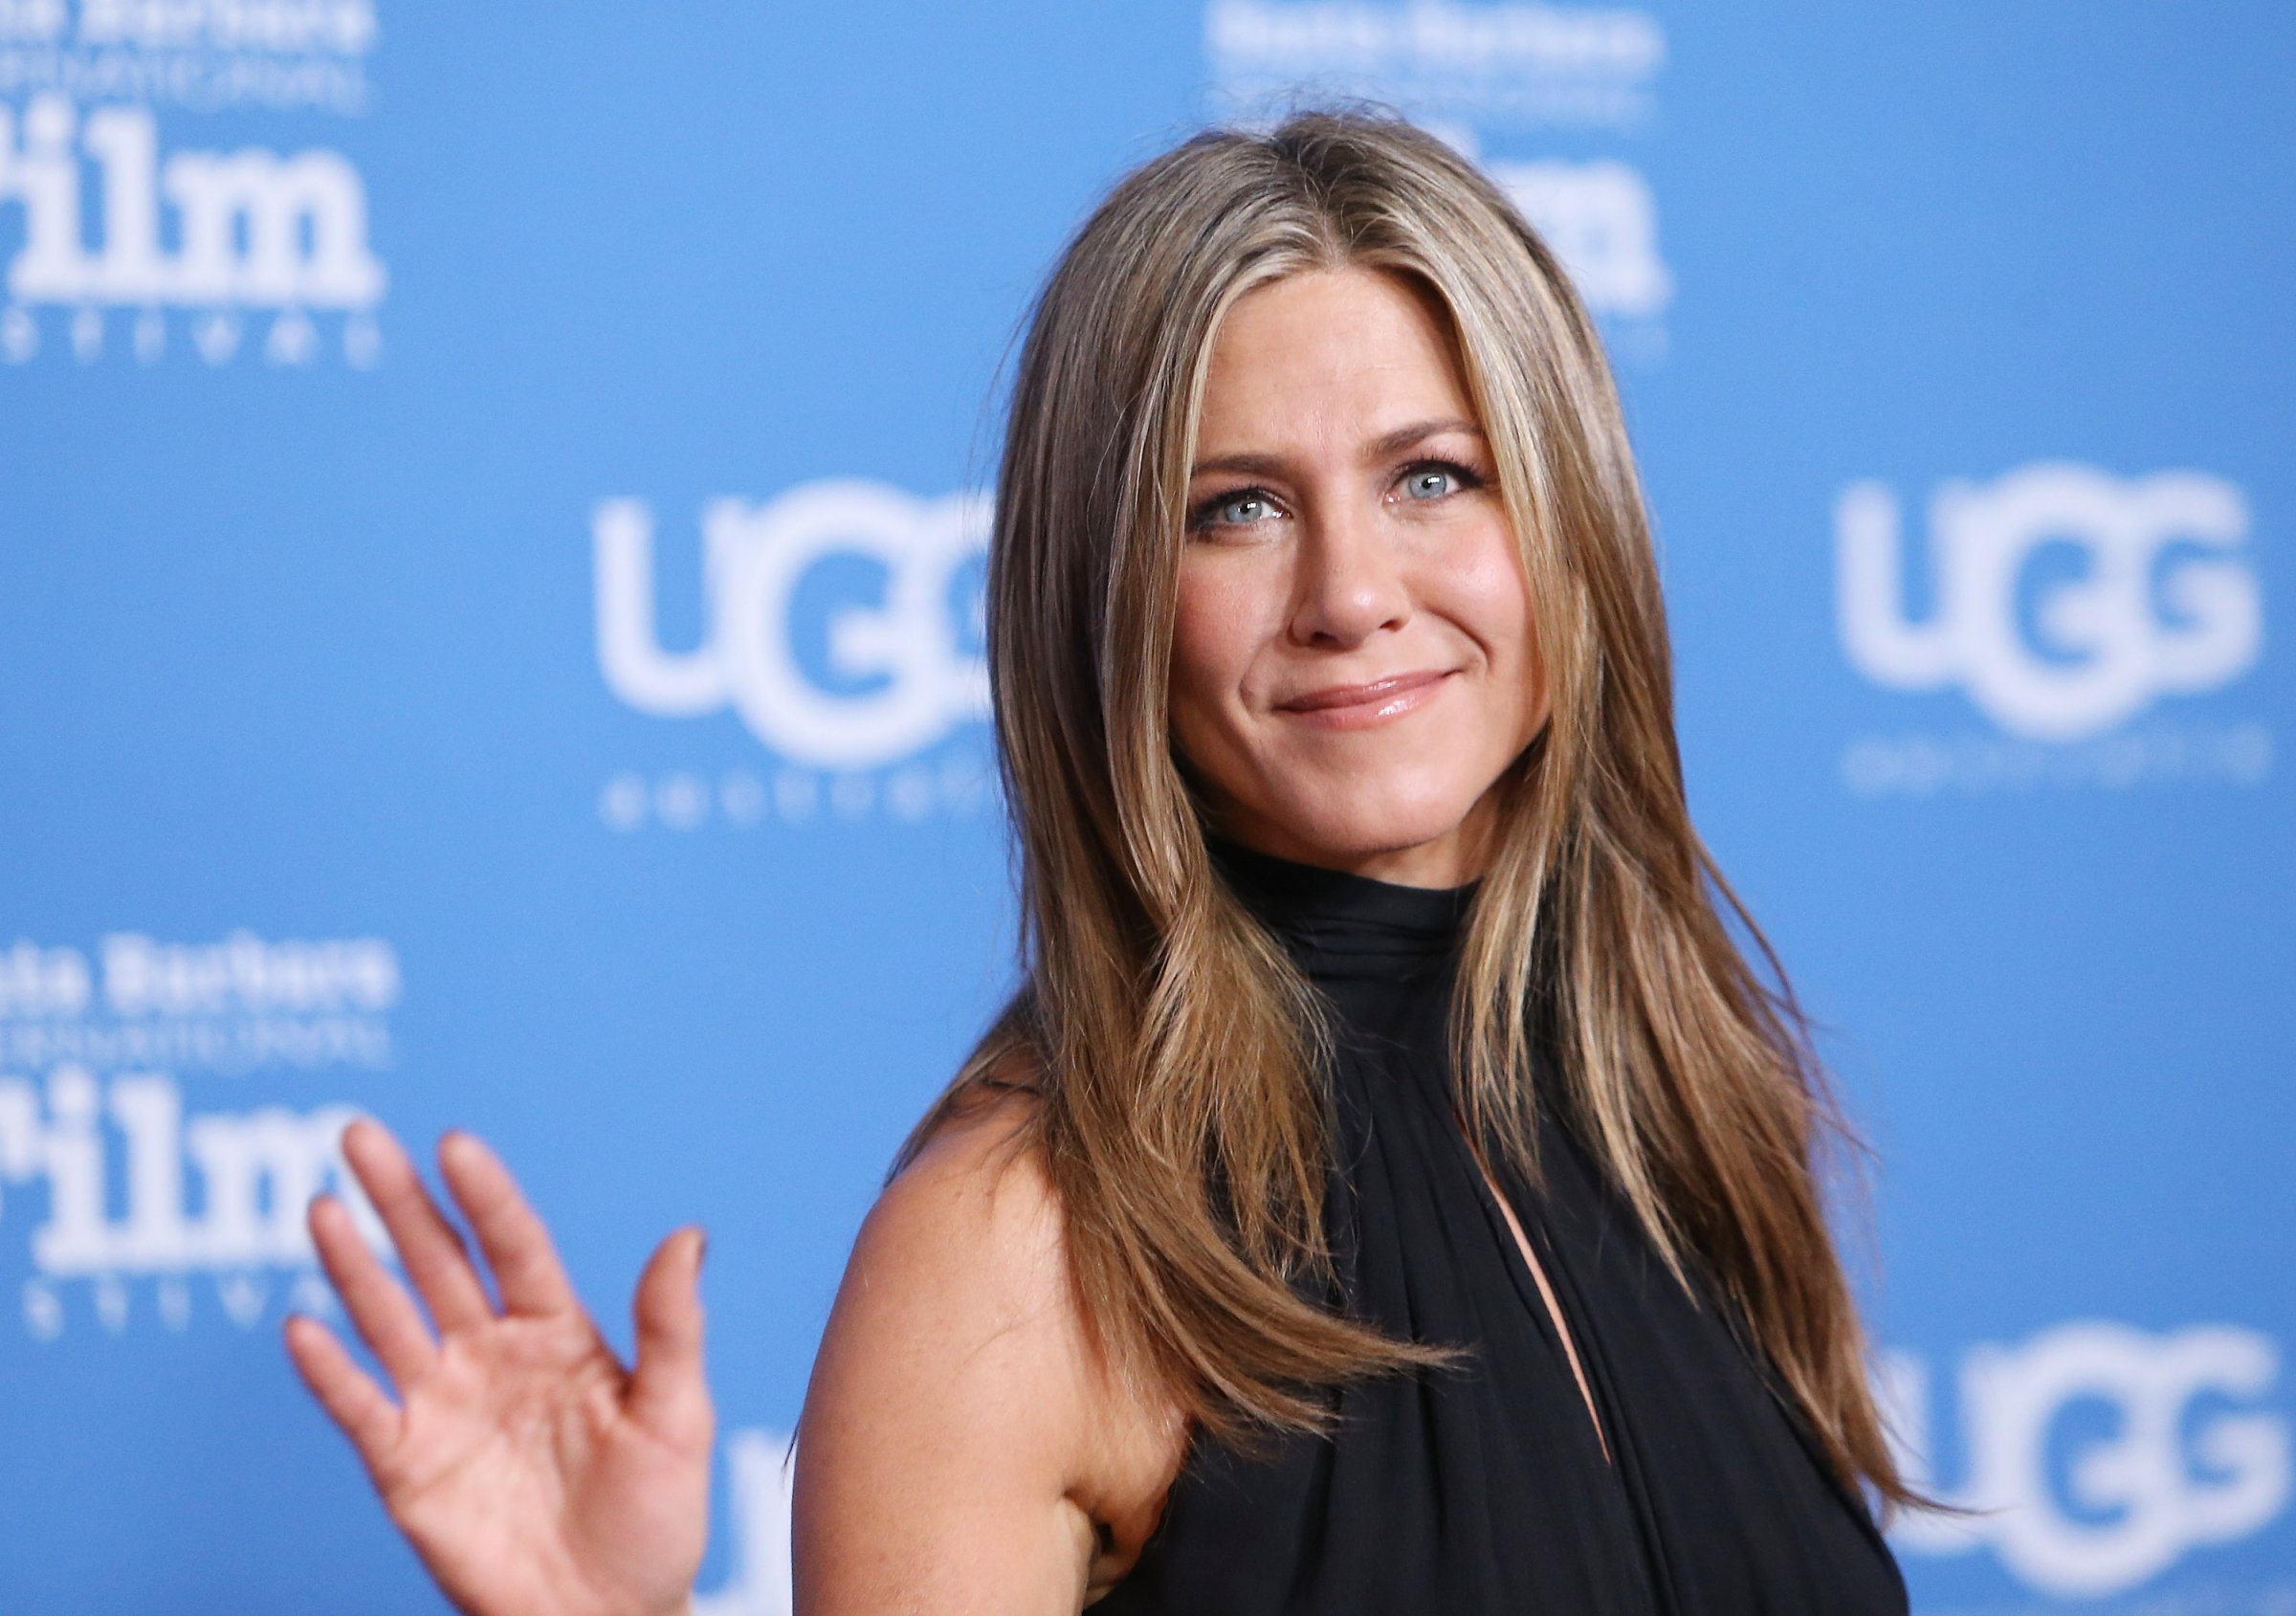 Jennifer Aniston Huffington Post op-ed about sexism in media